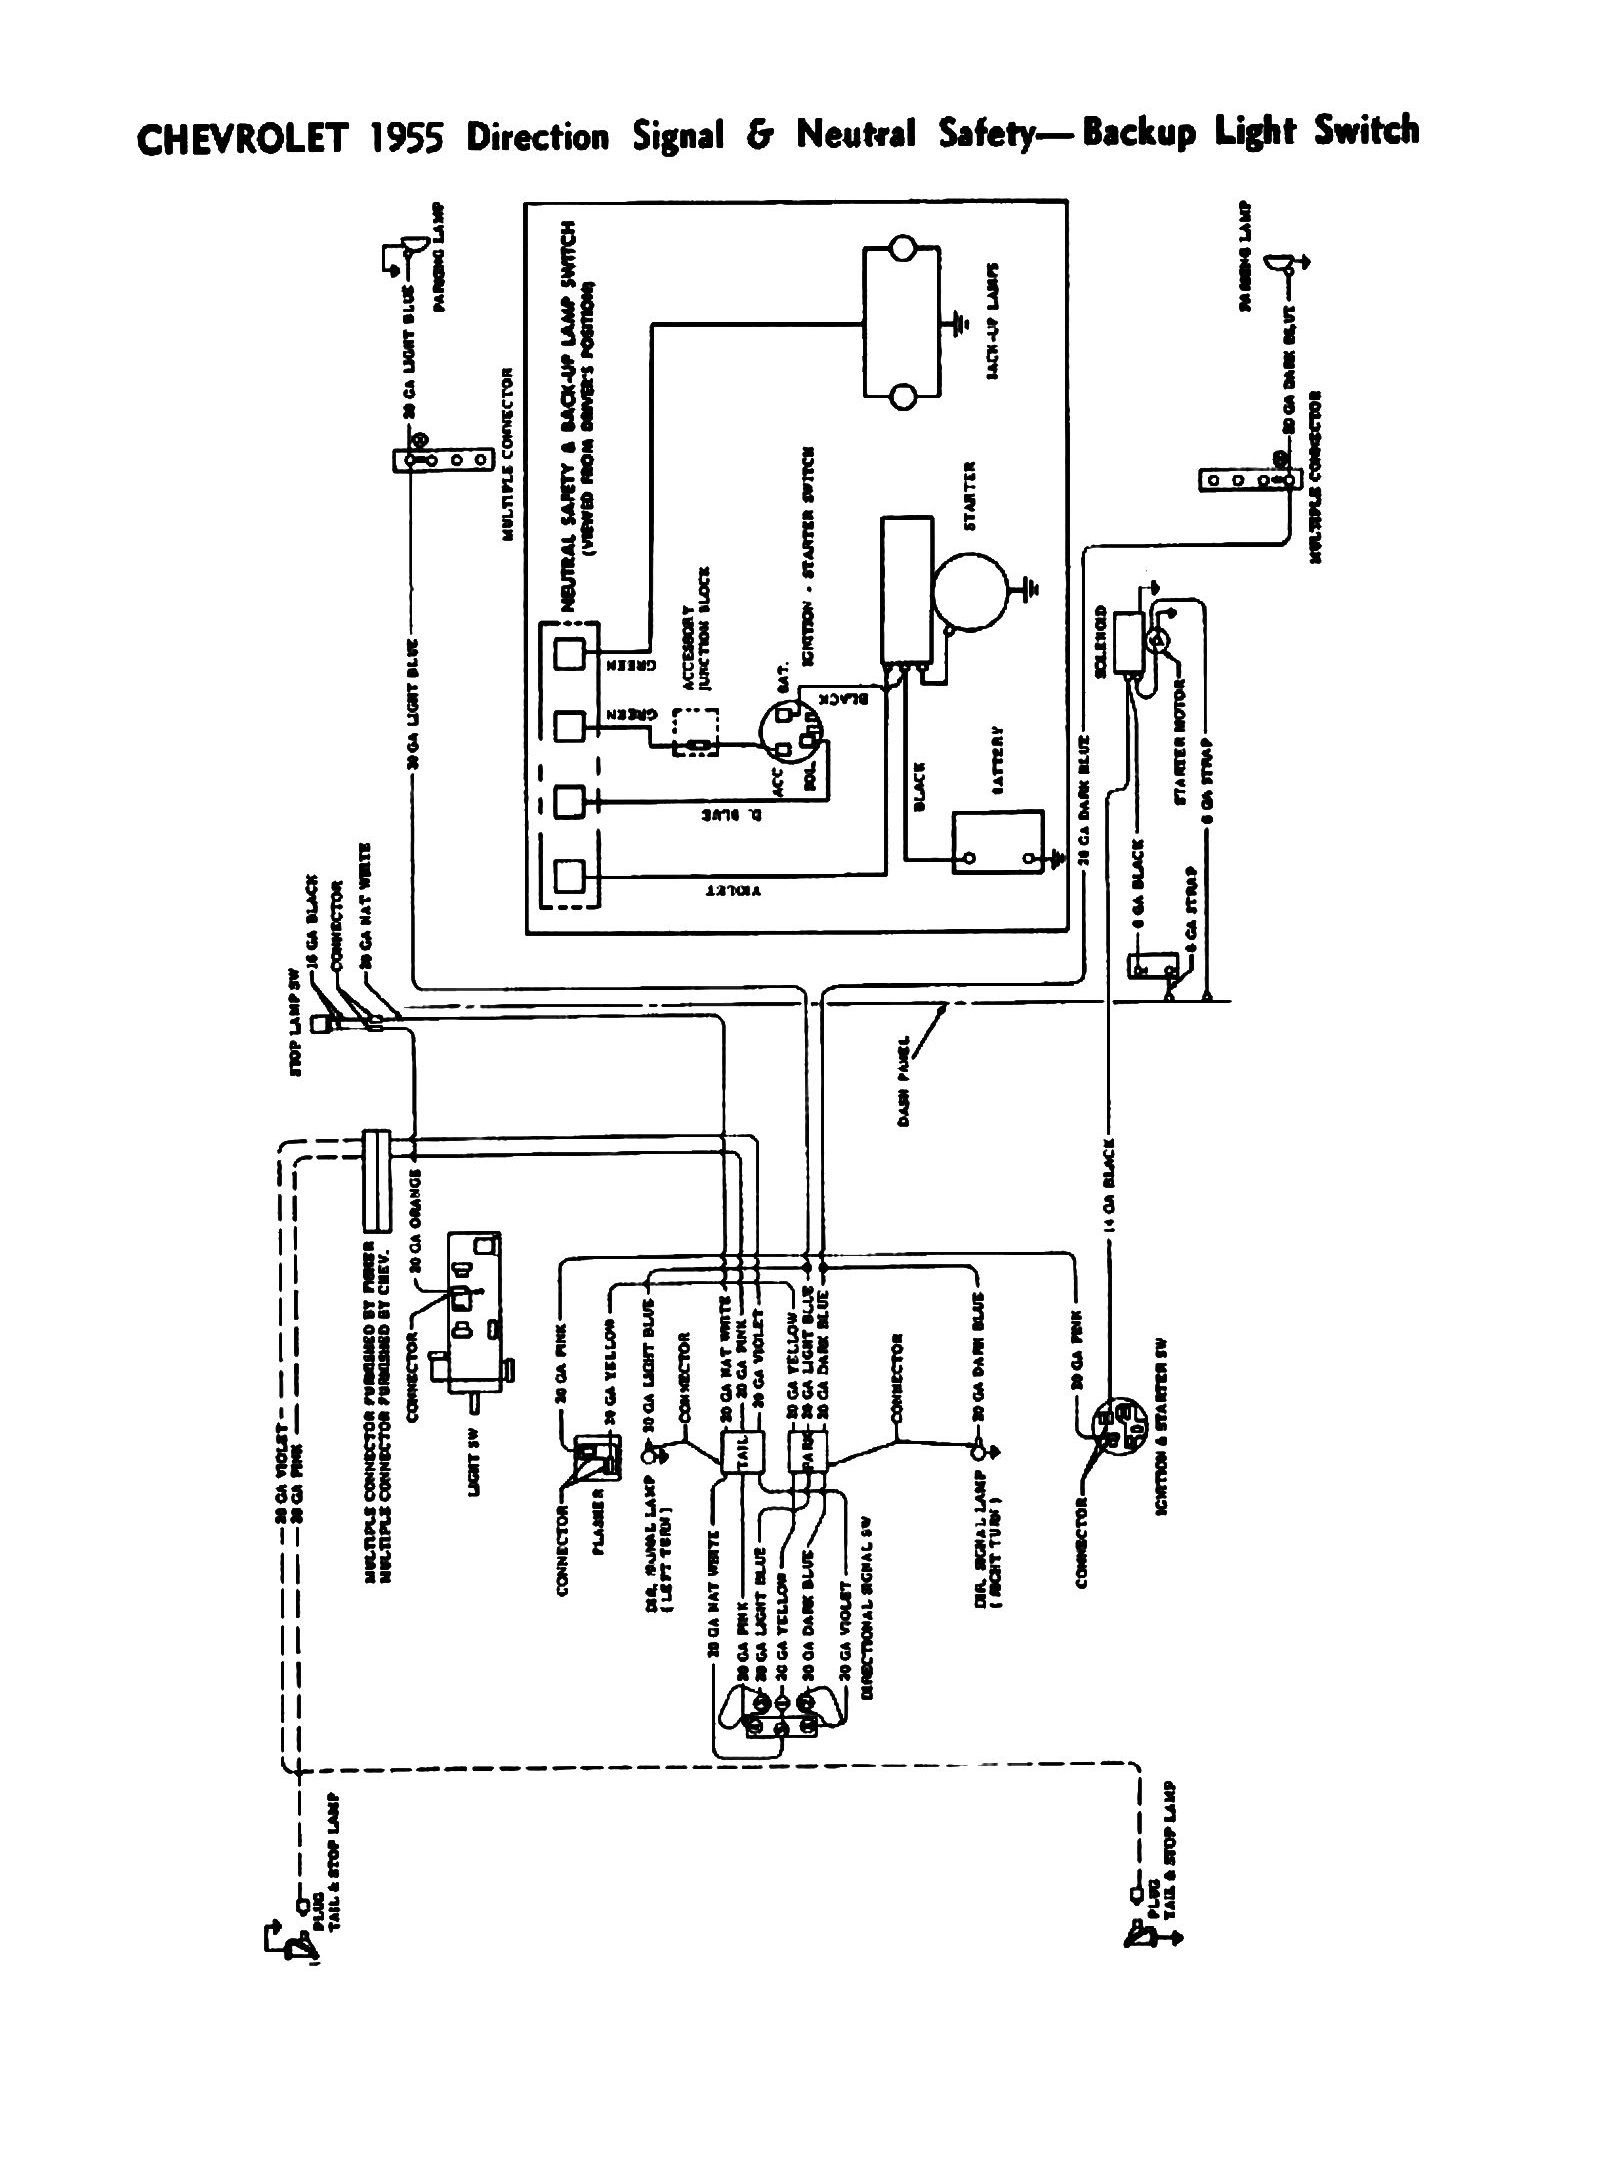 Ignition Switch Wiring Diagram Chevy 1957 Chevy Heater Wiring Diagram Wiring Diagrams